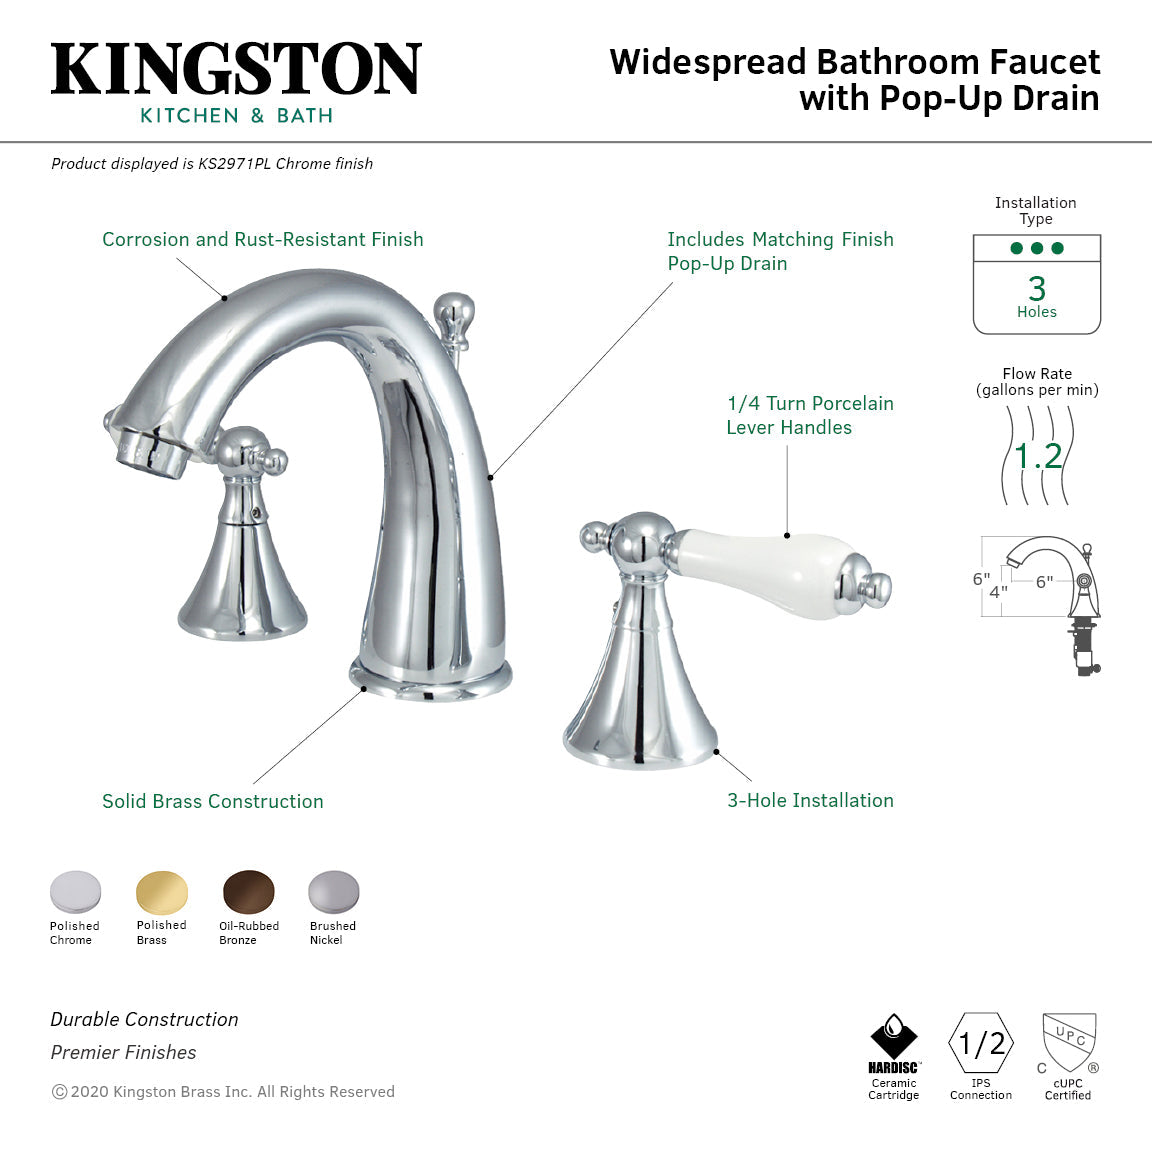 Naples KS2971PL Two-Handle 3-Hole Deck Mount Widespread Bathroom Faucet with Brass Pop-Up, Polished Chrome